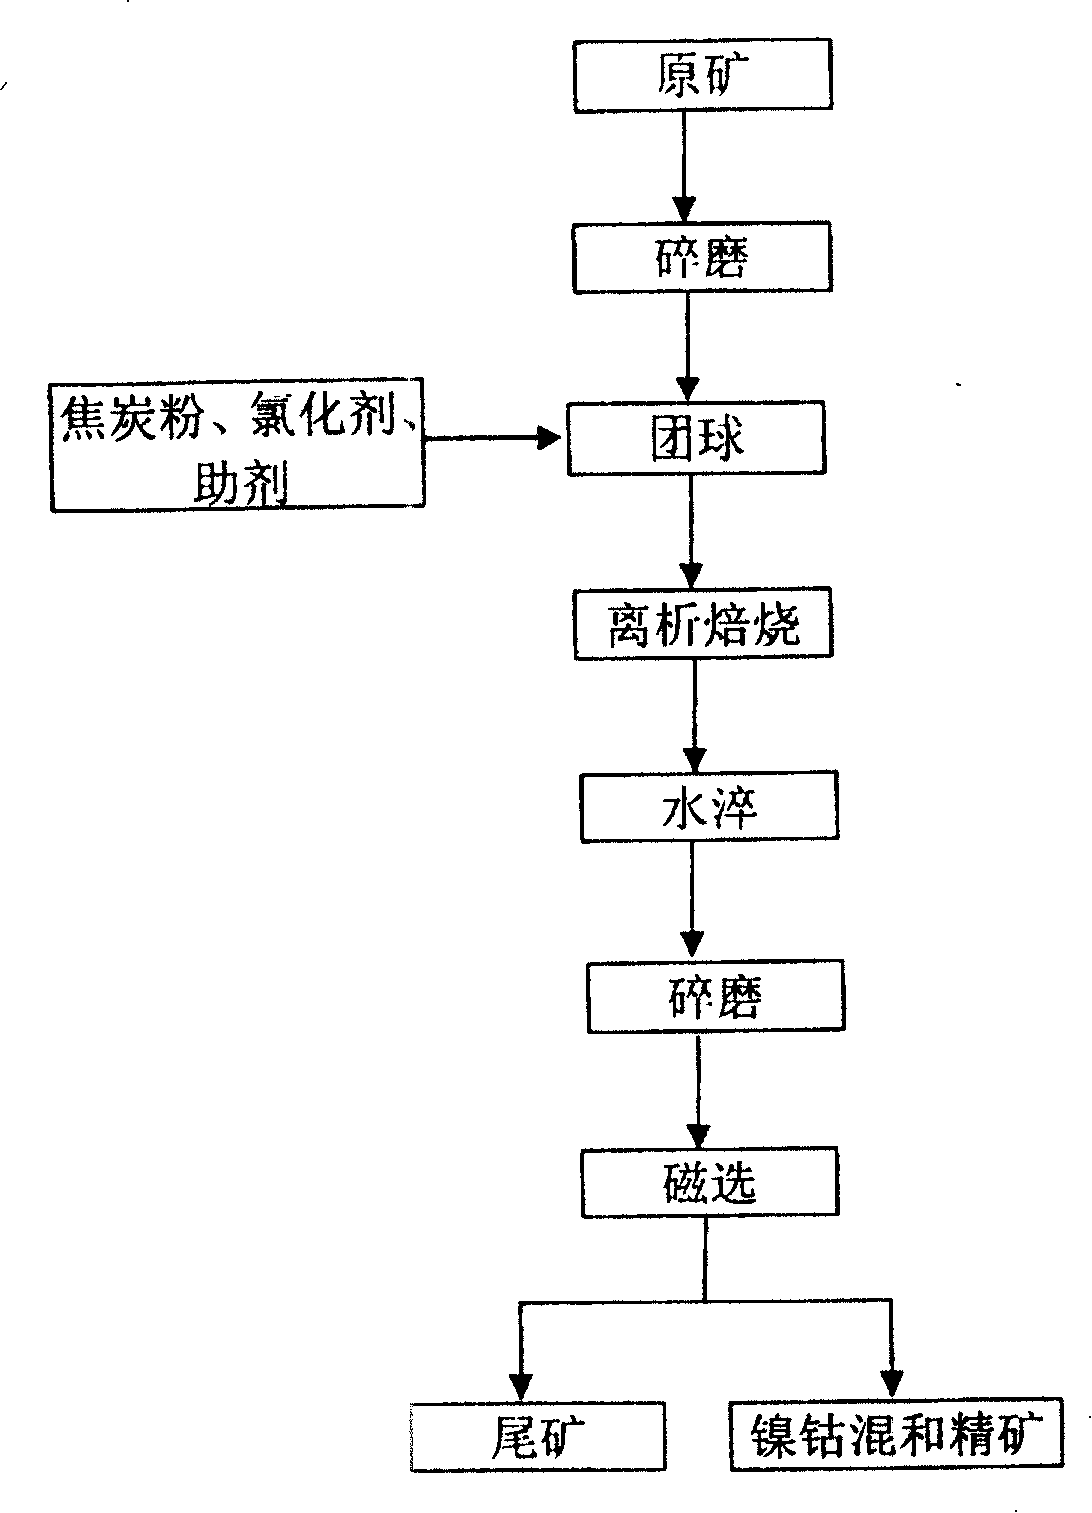 Method for recovering nickel and cobalt from nickel oxide ore and nickel silicide ore